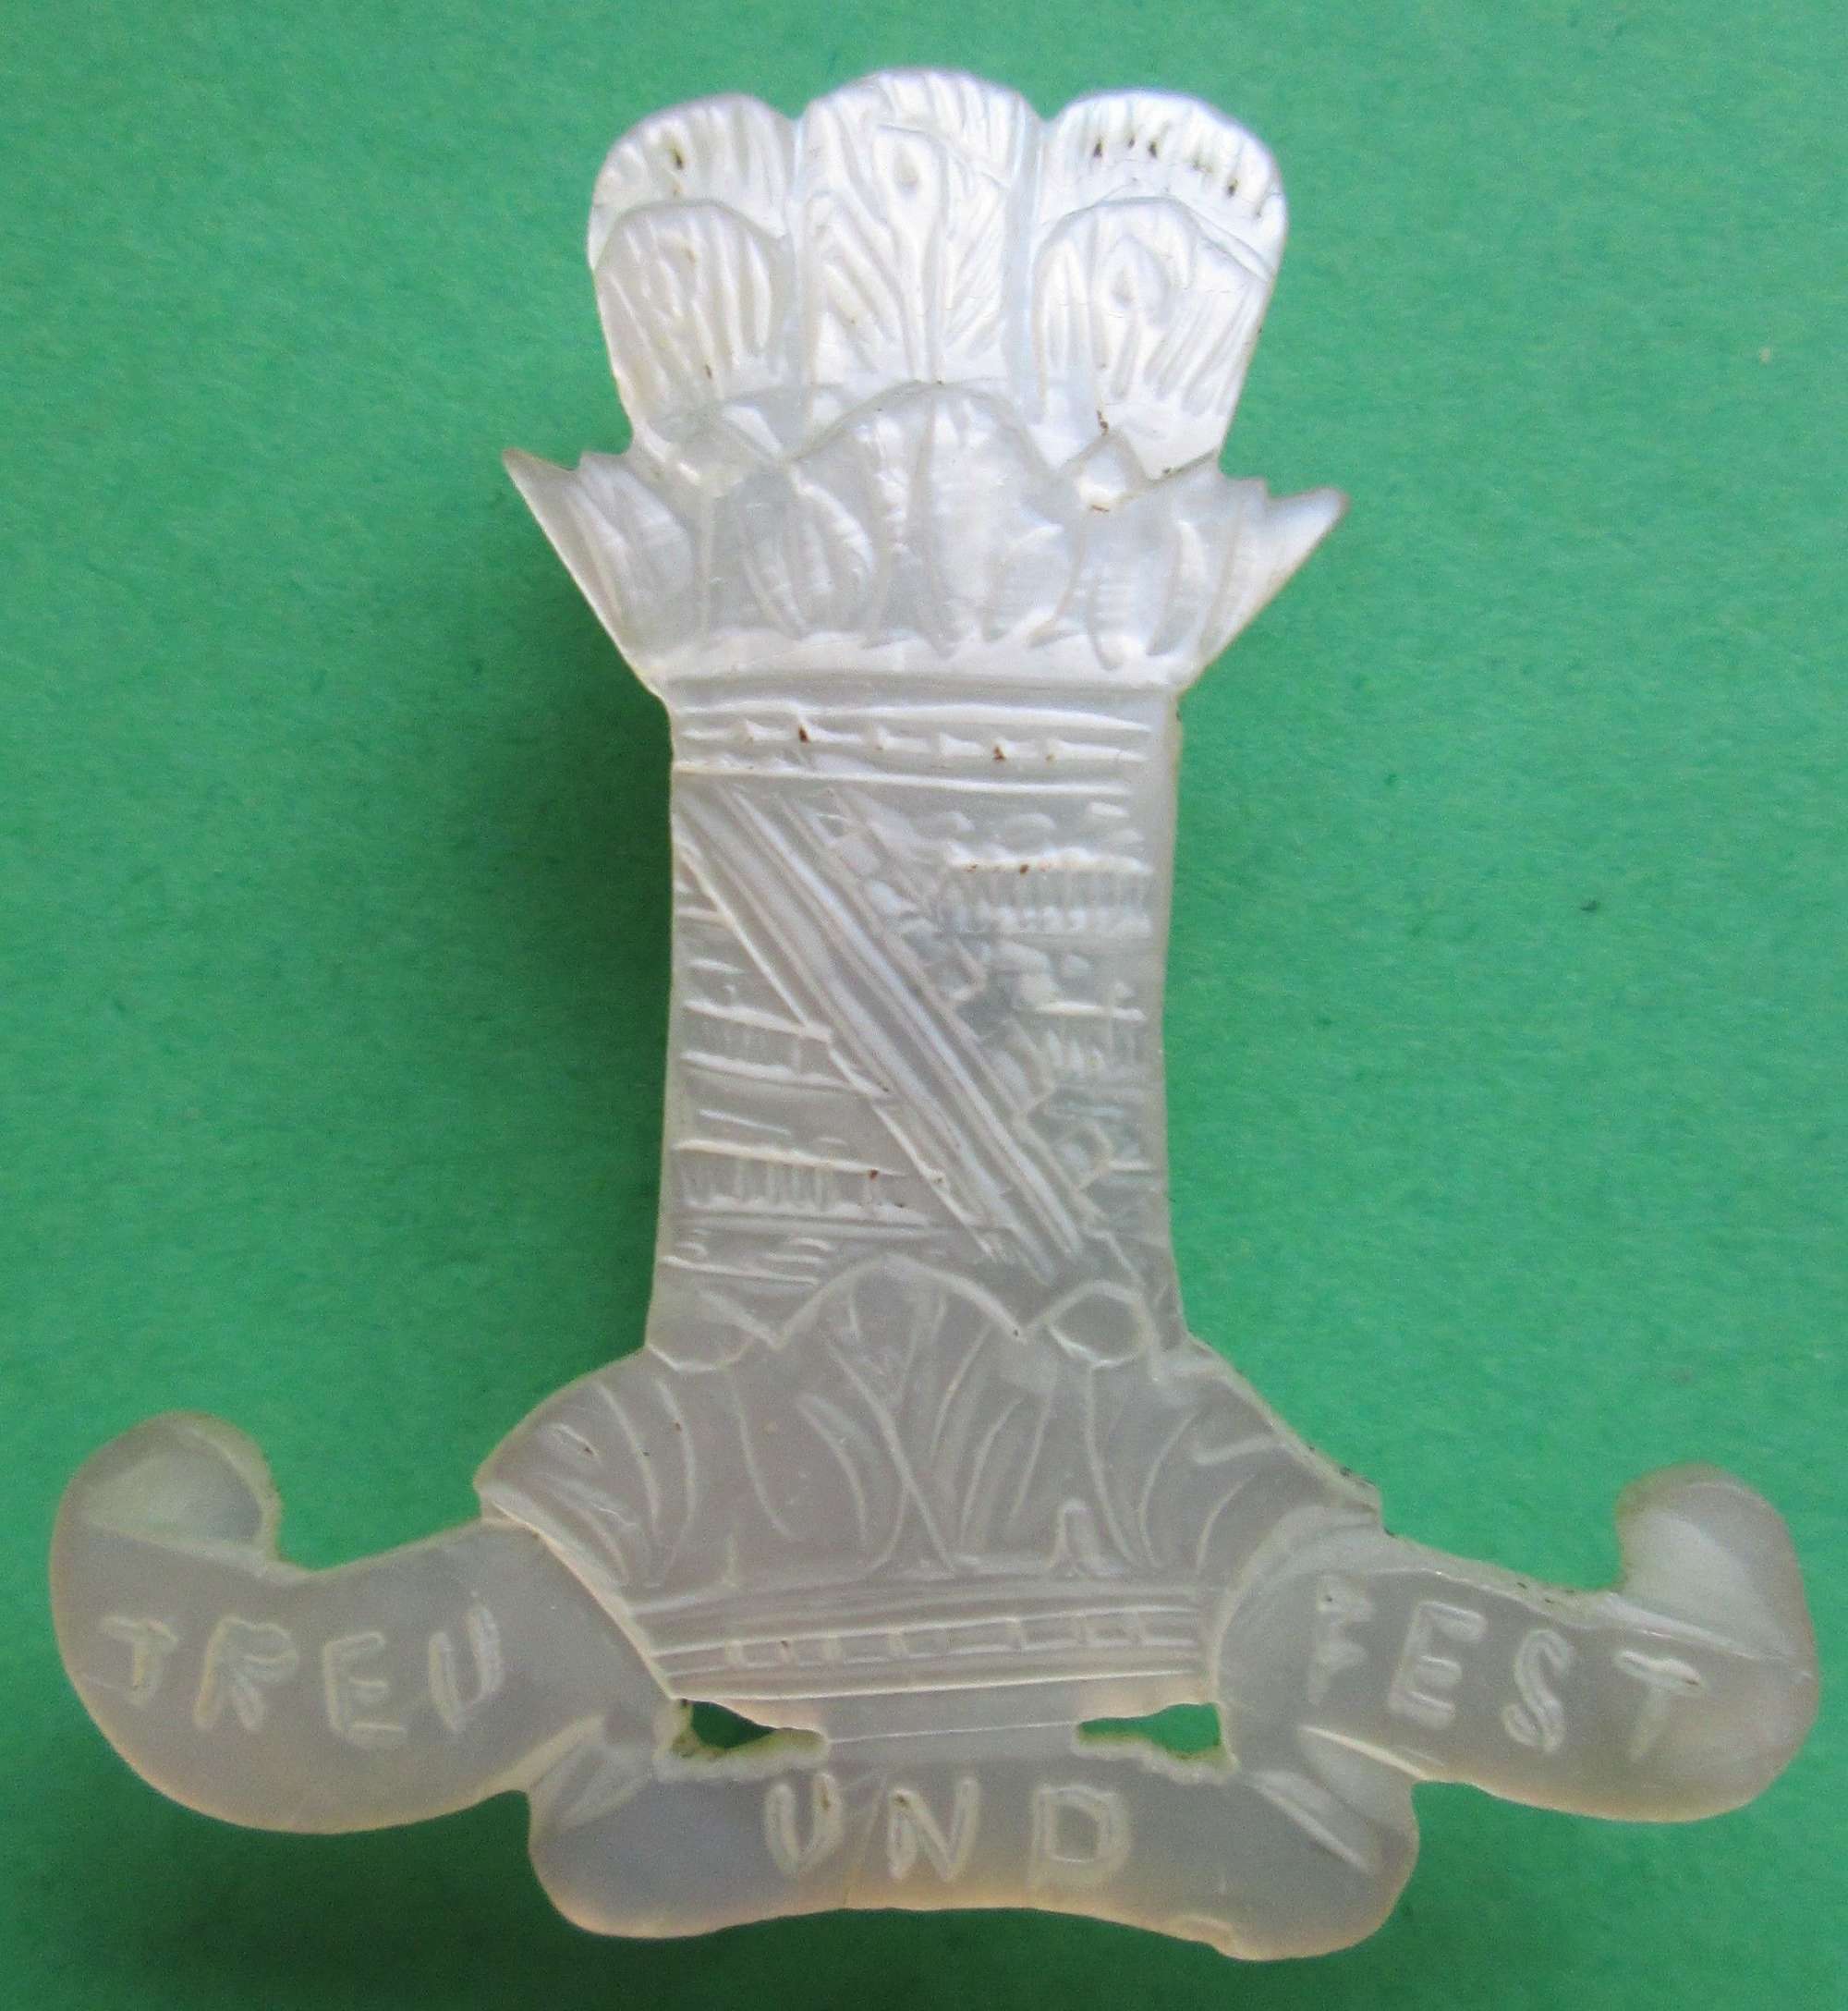 AN ELEVENTH HUSSARS MOTHER OF PEARL SWEETHEART BROOCH